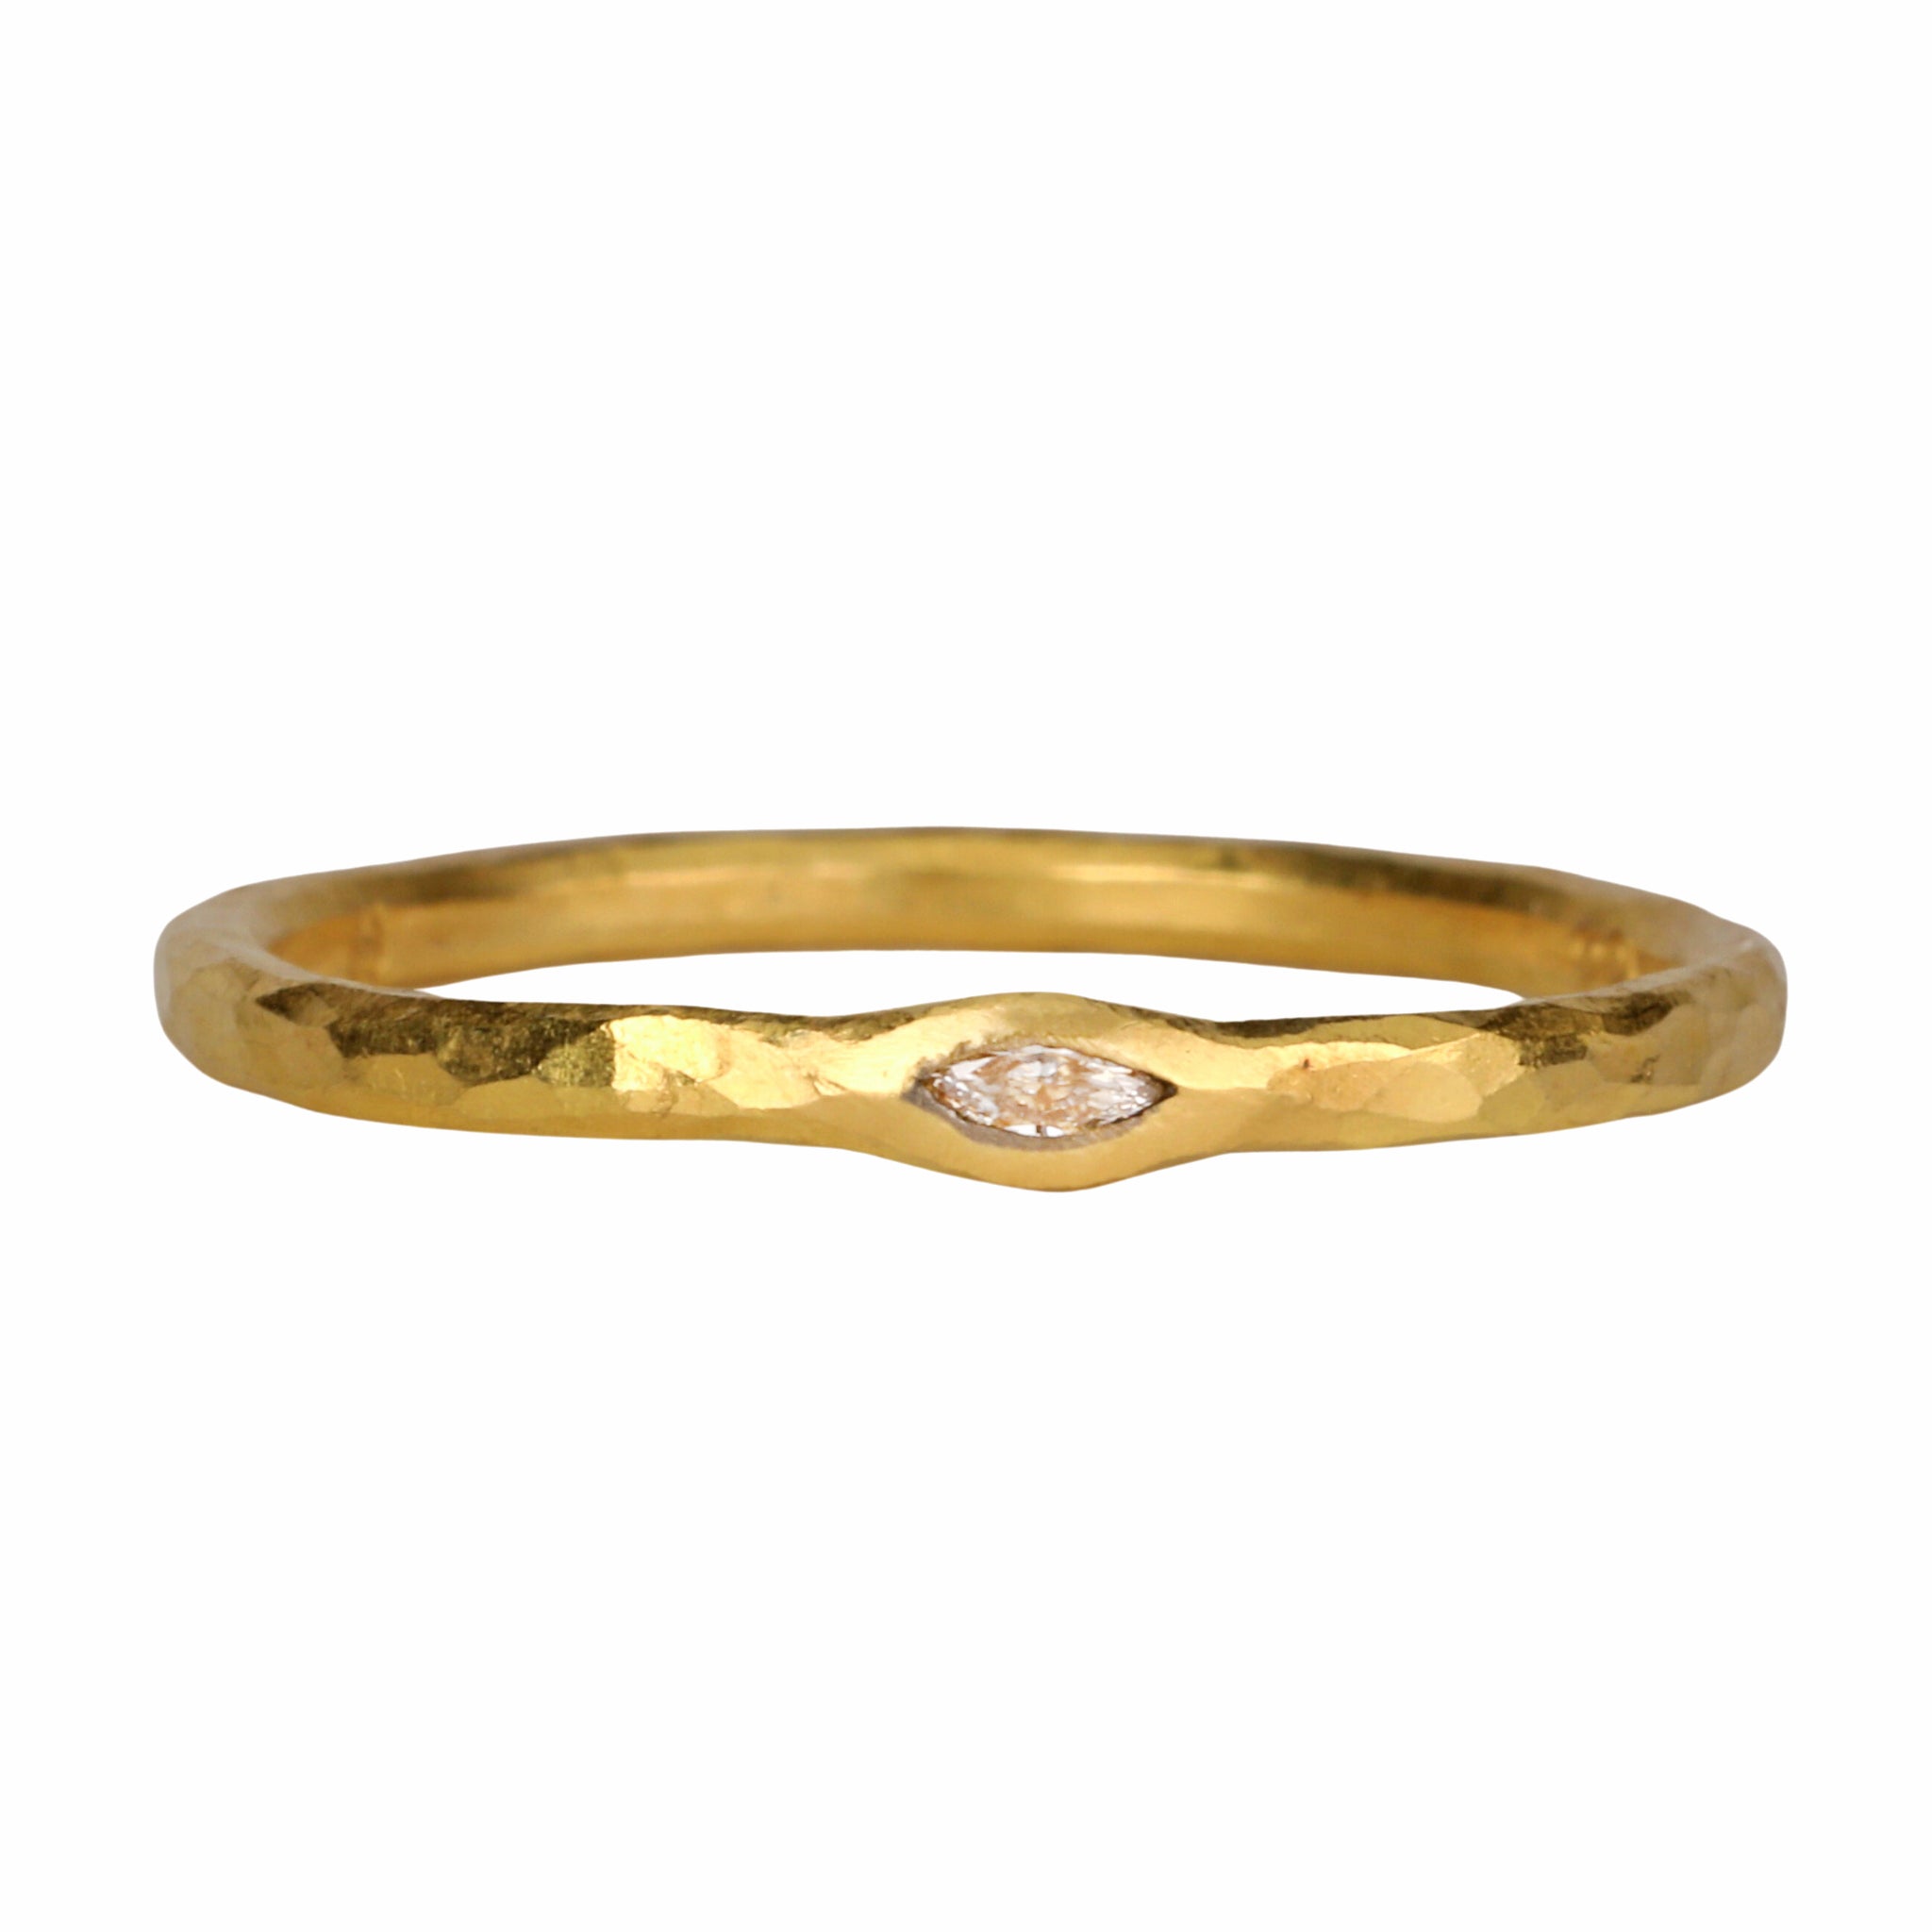 22K Gold Thin Hammered Band with Marquise Diamond - Peridot Fine Jewelry - Cathy Waterman